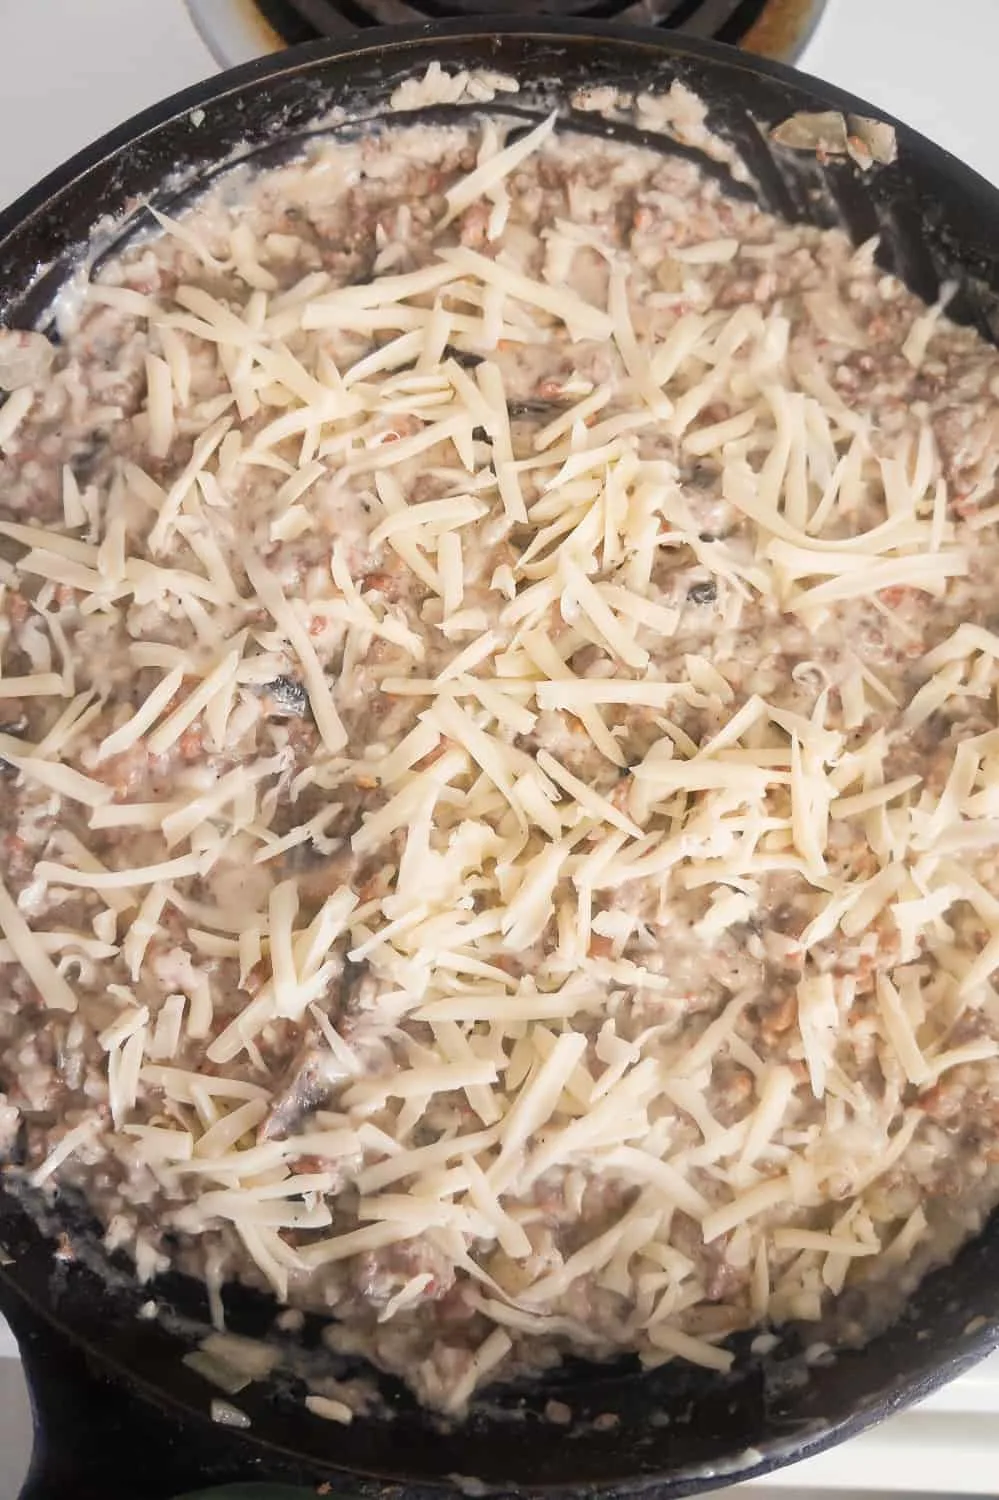 shredded Swiss cheese on top of ground beef and rice